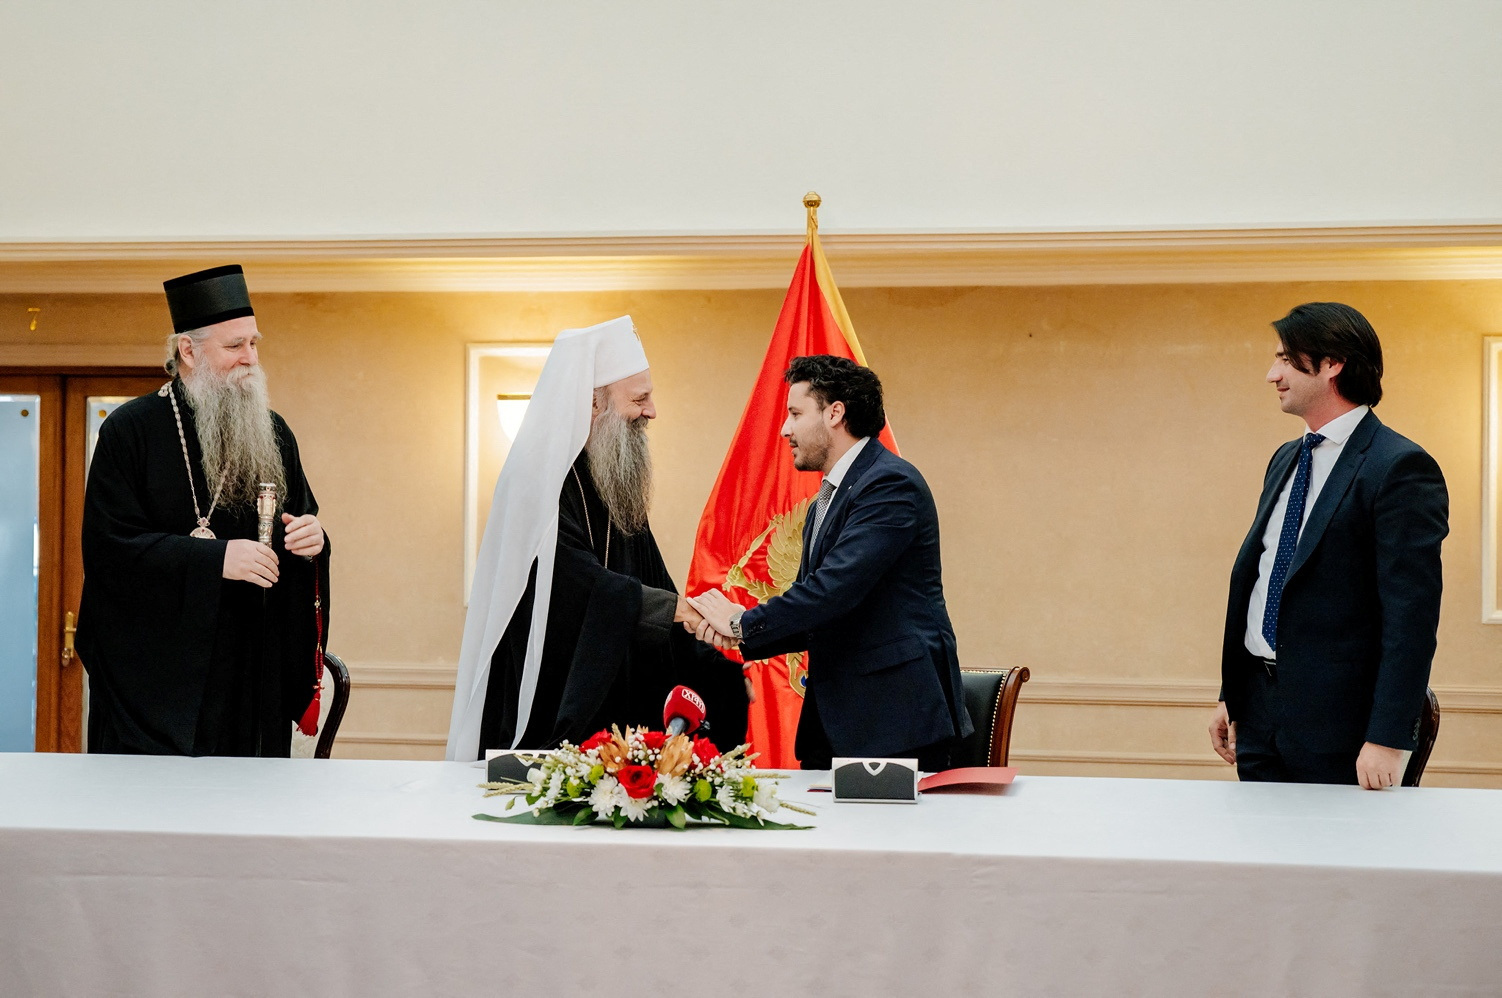 Montenegro signs long-disputed contract with Serbian Orthodox church